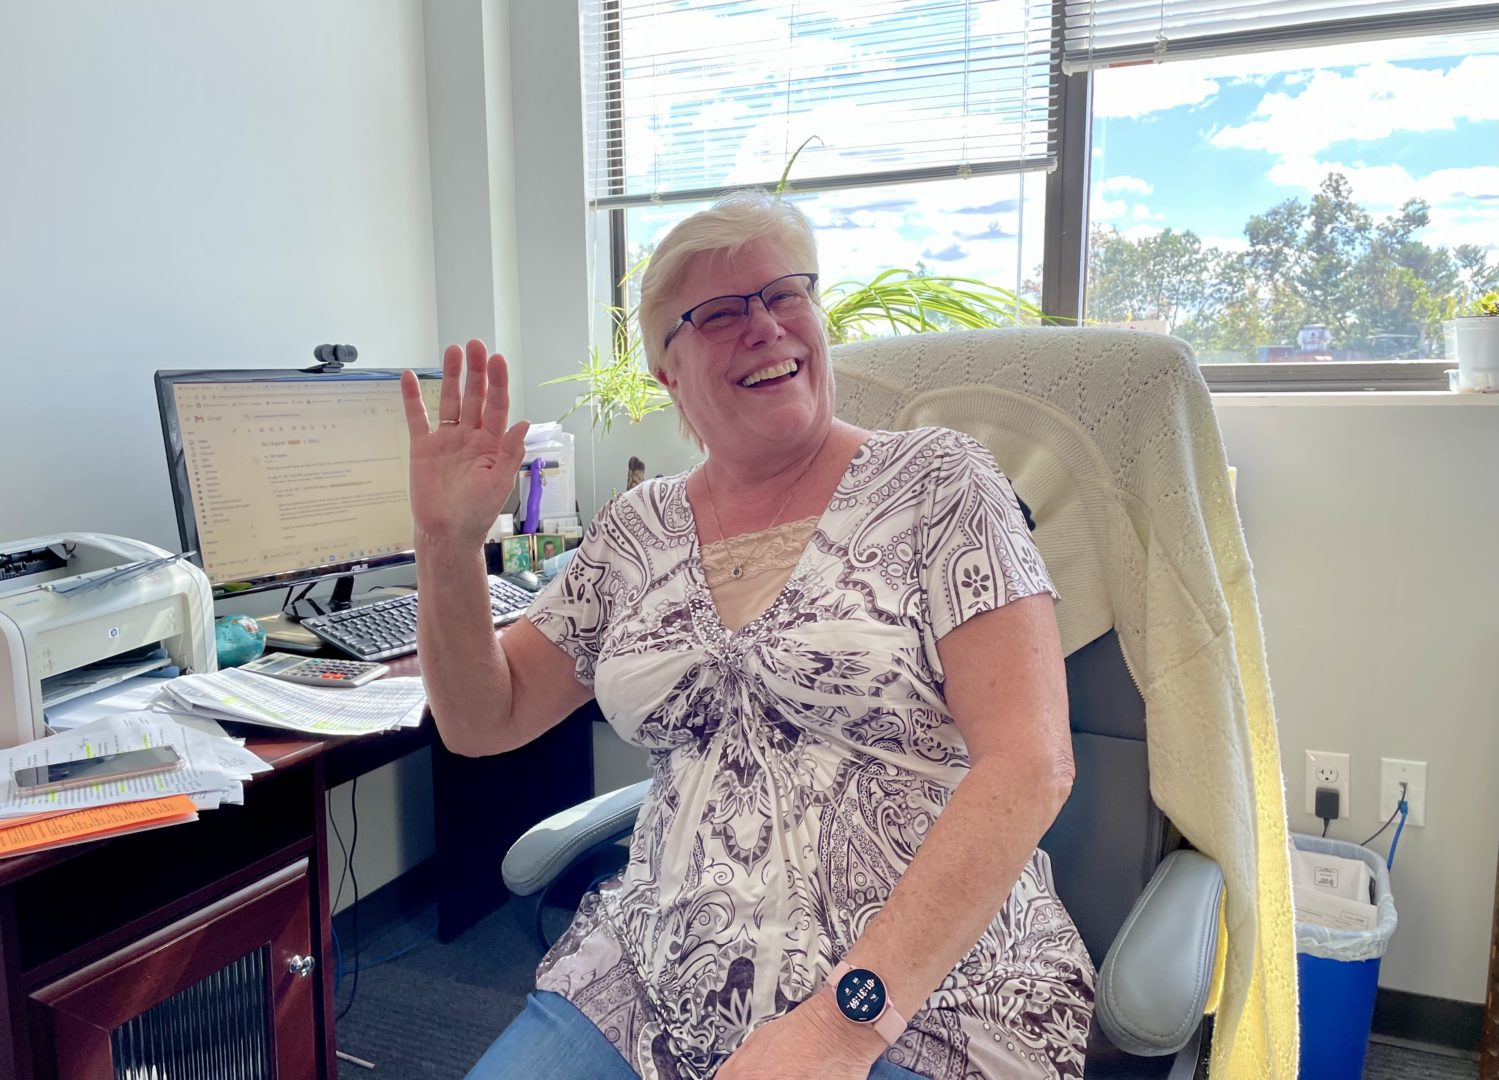 Loraine, the Arts for Learning Program Manager, sits at her desk waving and smiling.